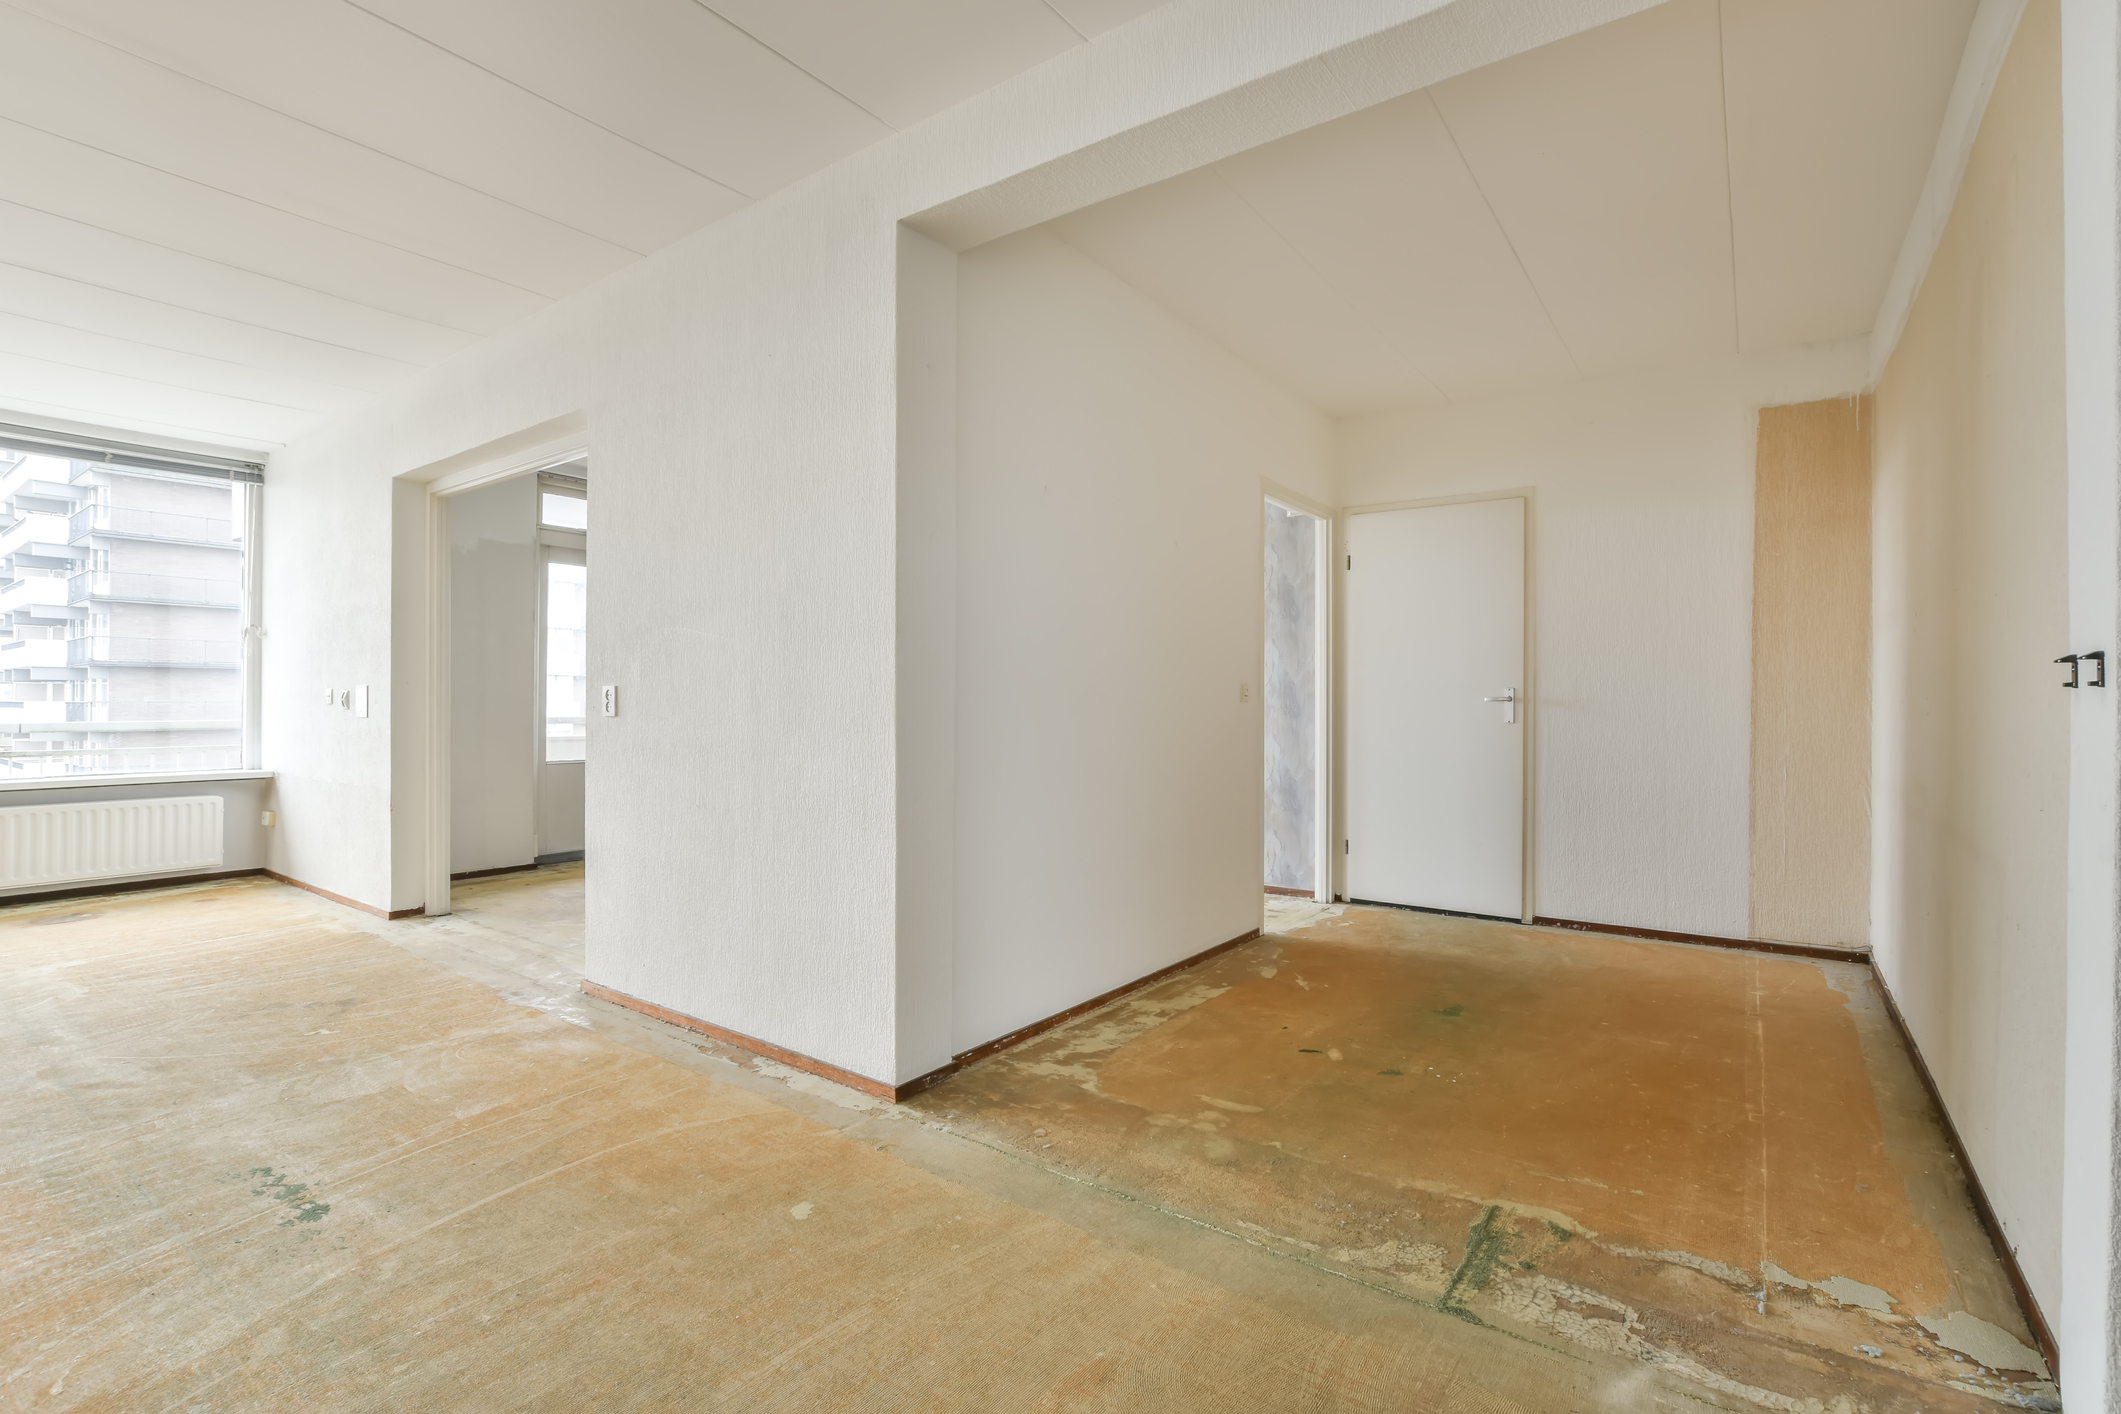 Open floorplan with wall removed